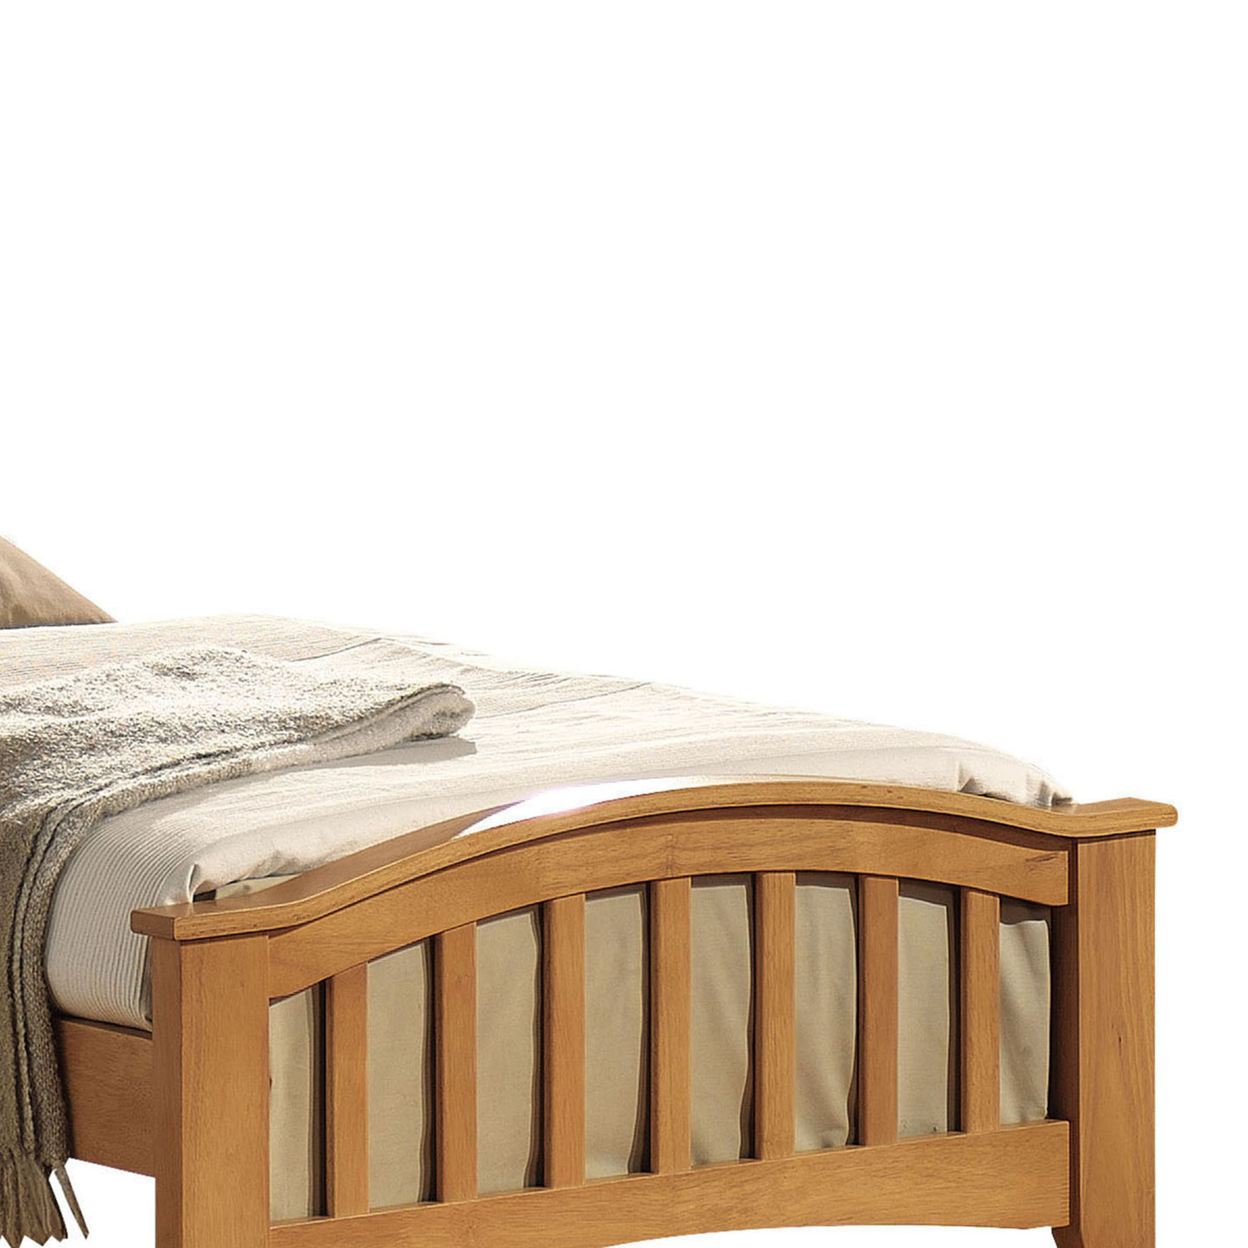 Mission Style Wooden Twin Bed With Arched Slatted Headboard And Footboard, Maple Brown- Saltoro Sherpi